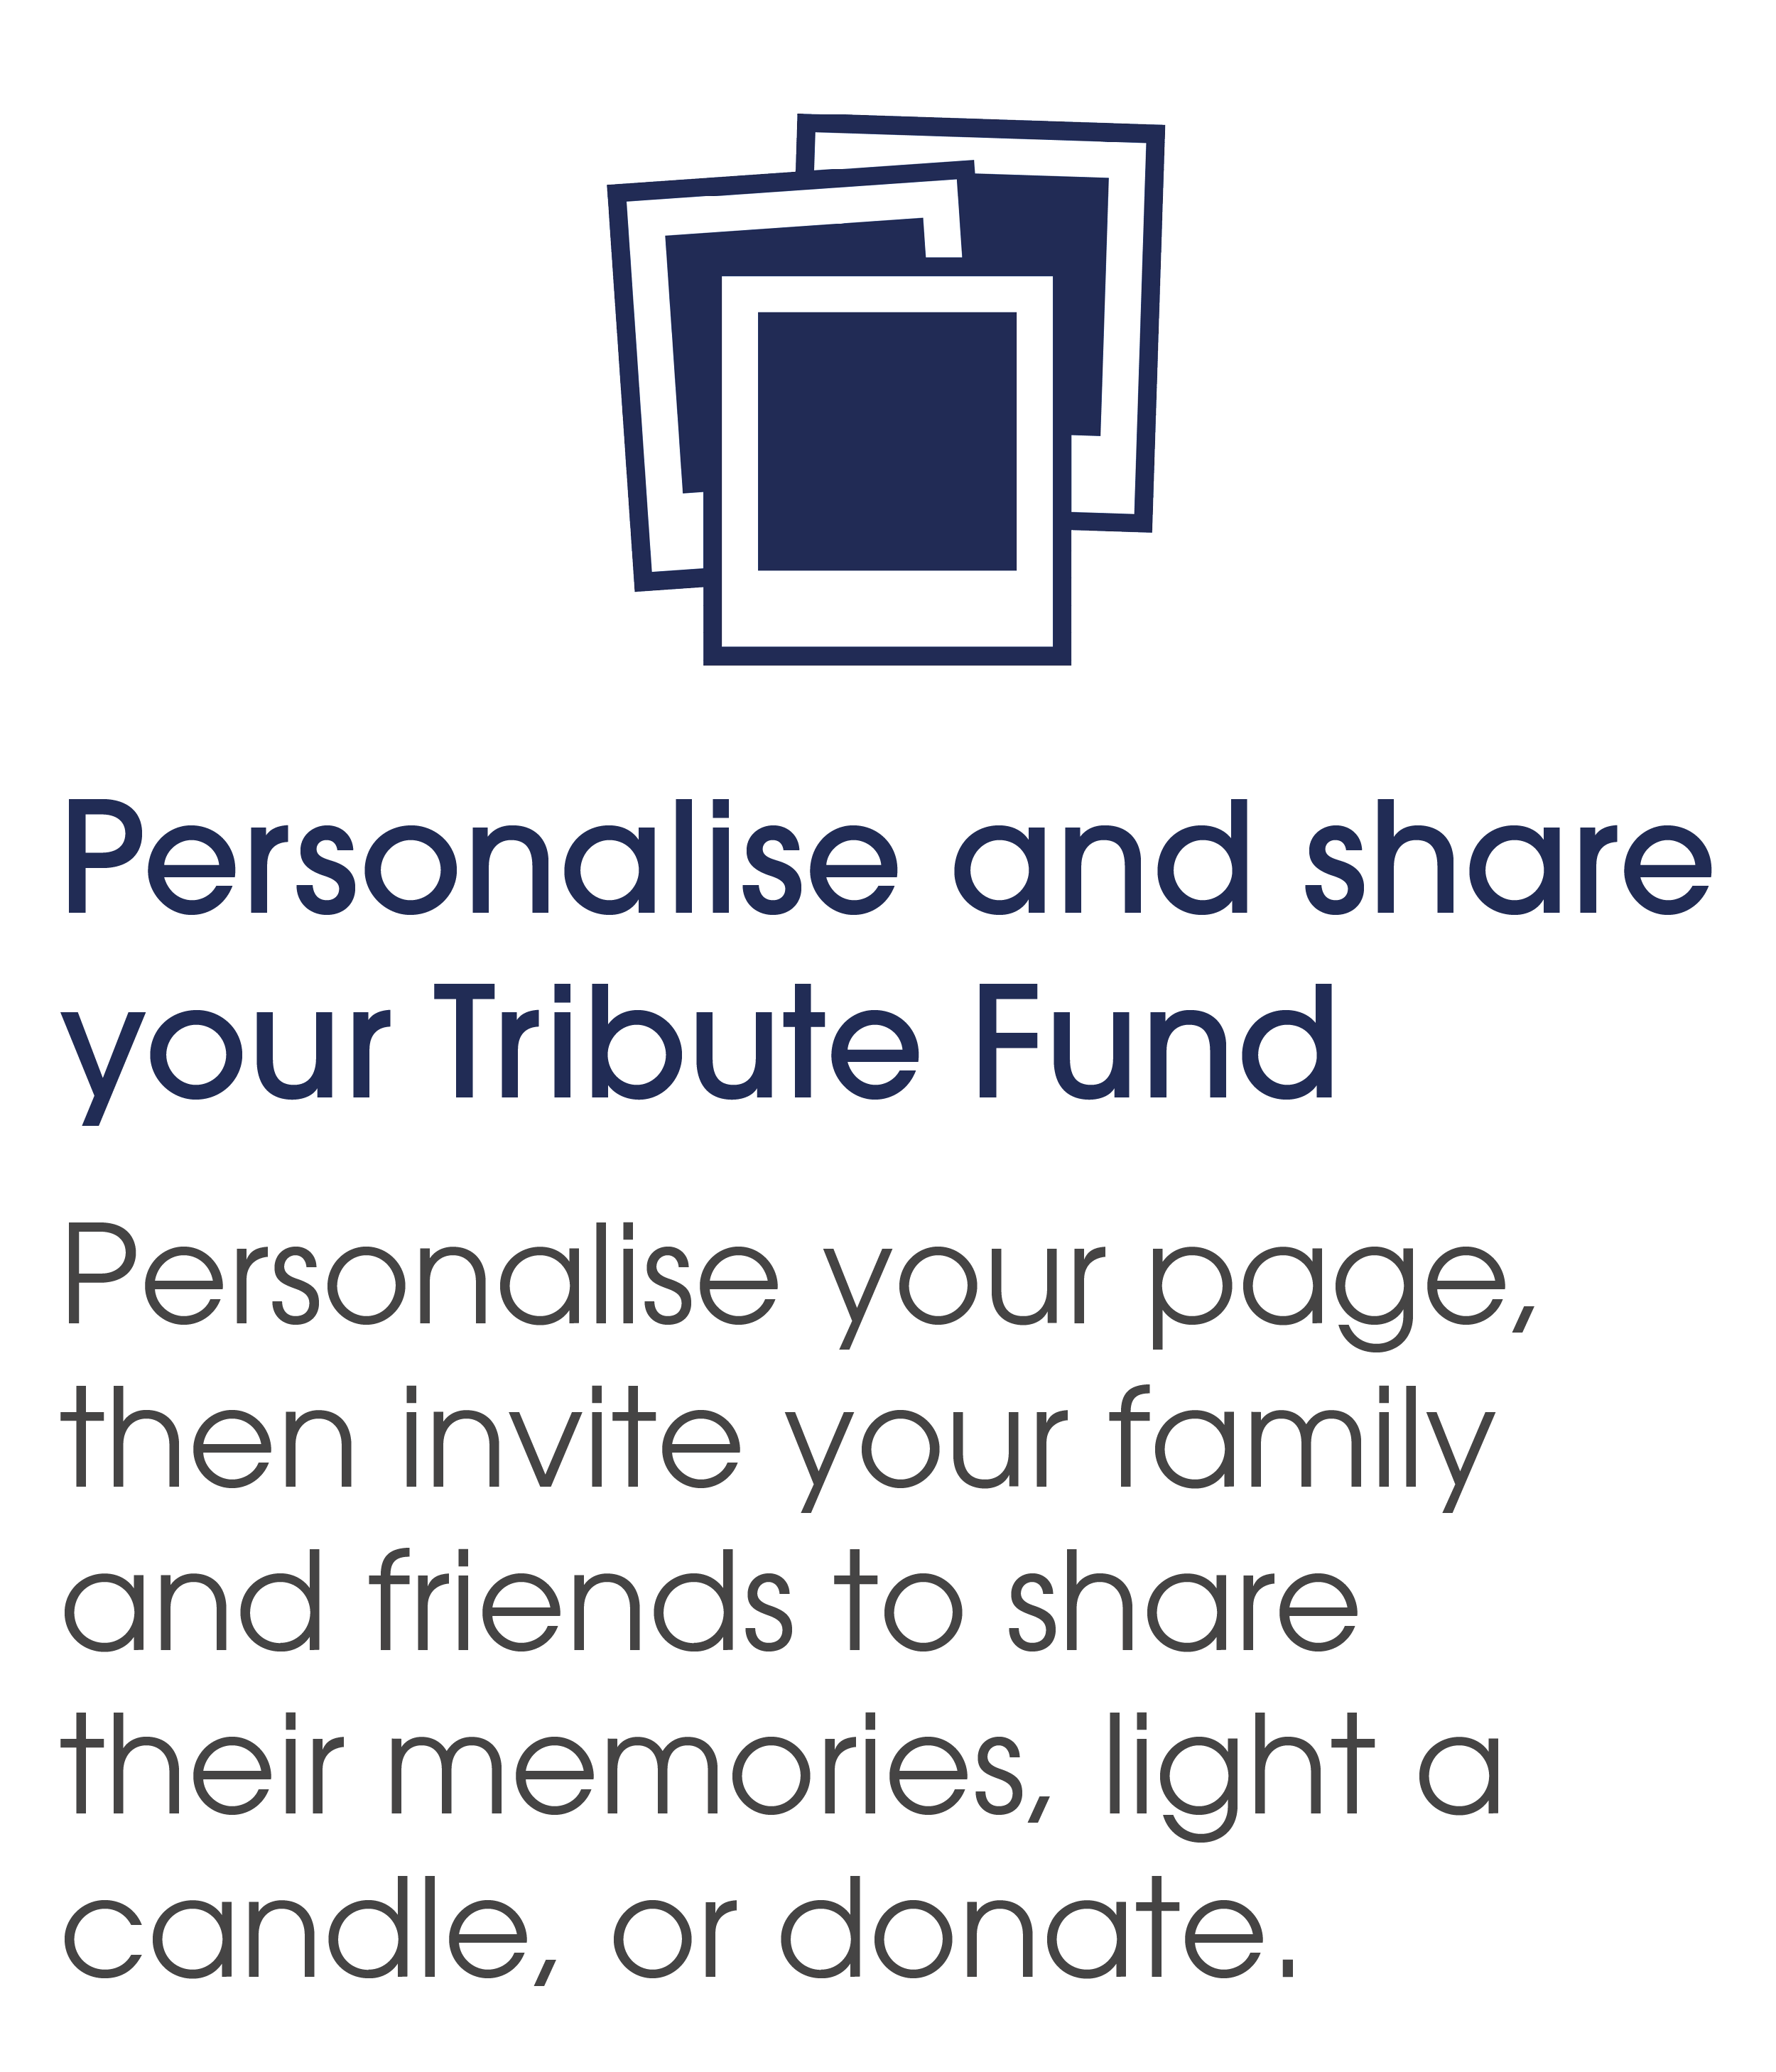 Personalise your Tribute Fund, then invite your family and friends to share their memories, light a candle, or donate.